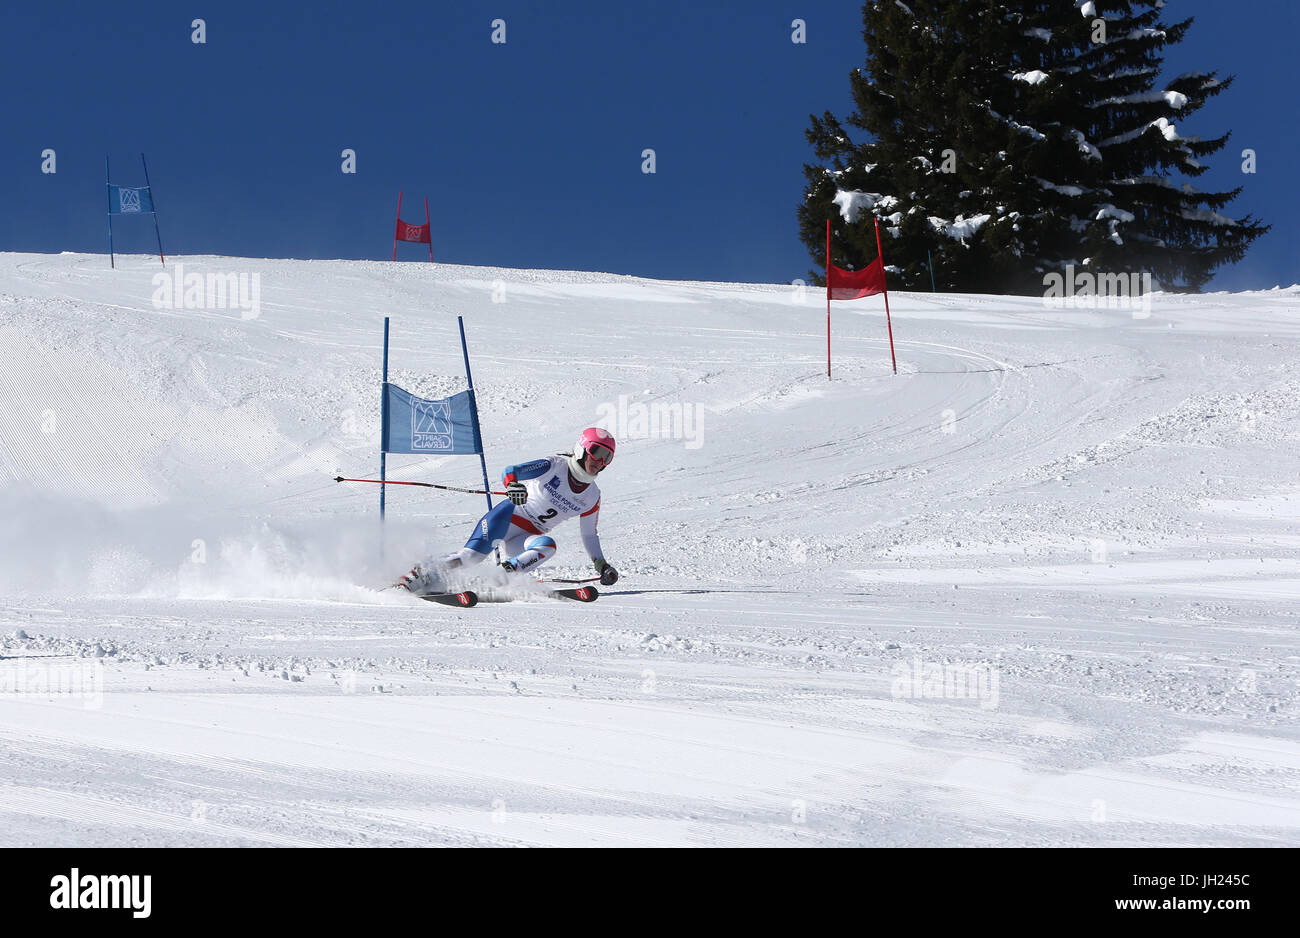 French Alps.  Giant Slalom skier rounds gate at high speed.  France. Stock Photo